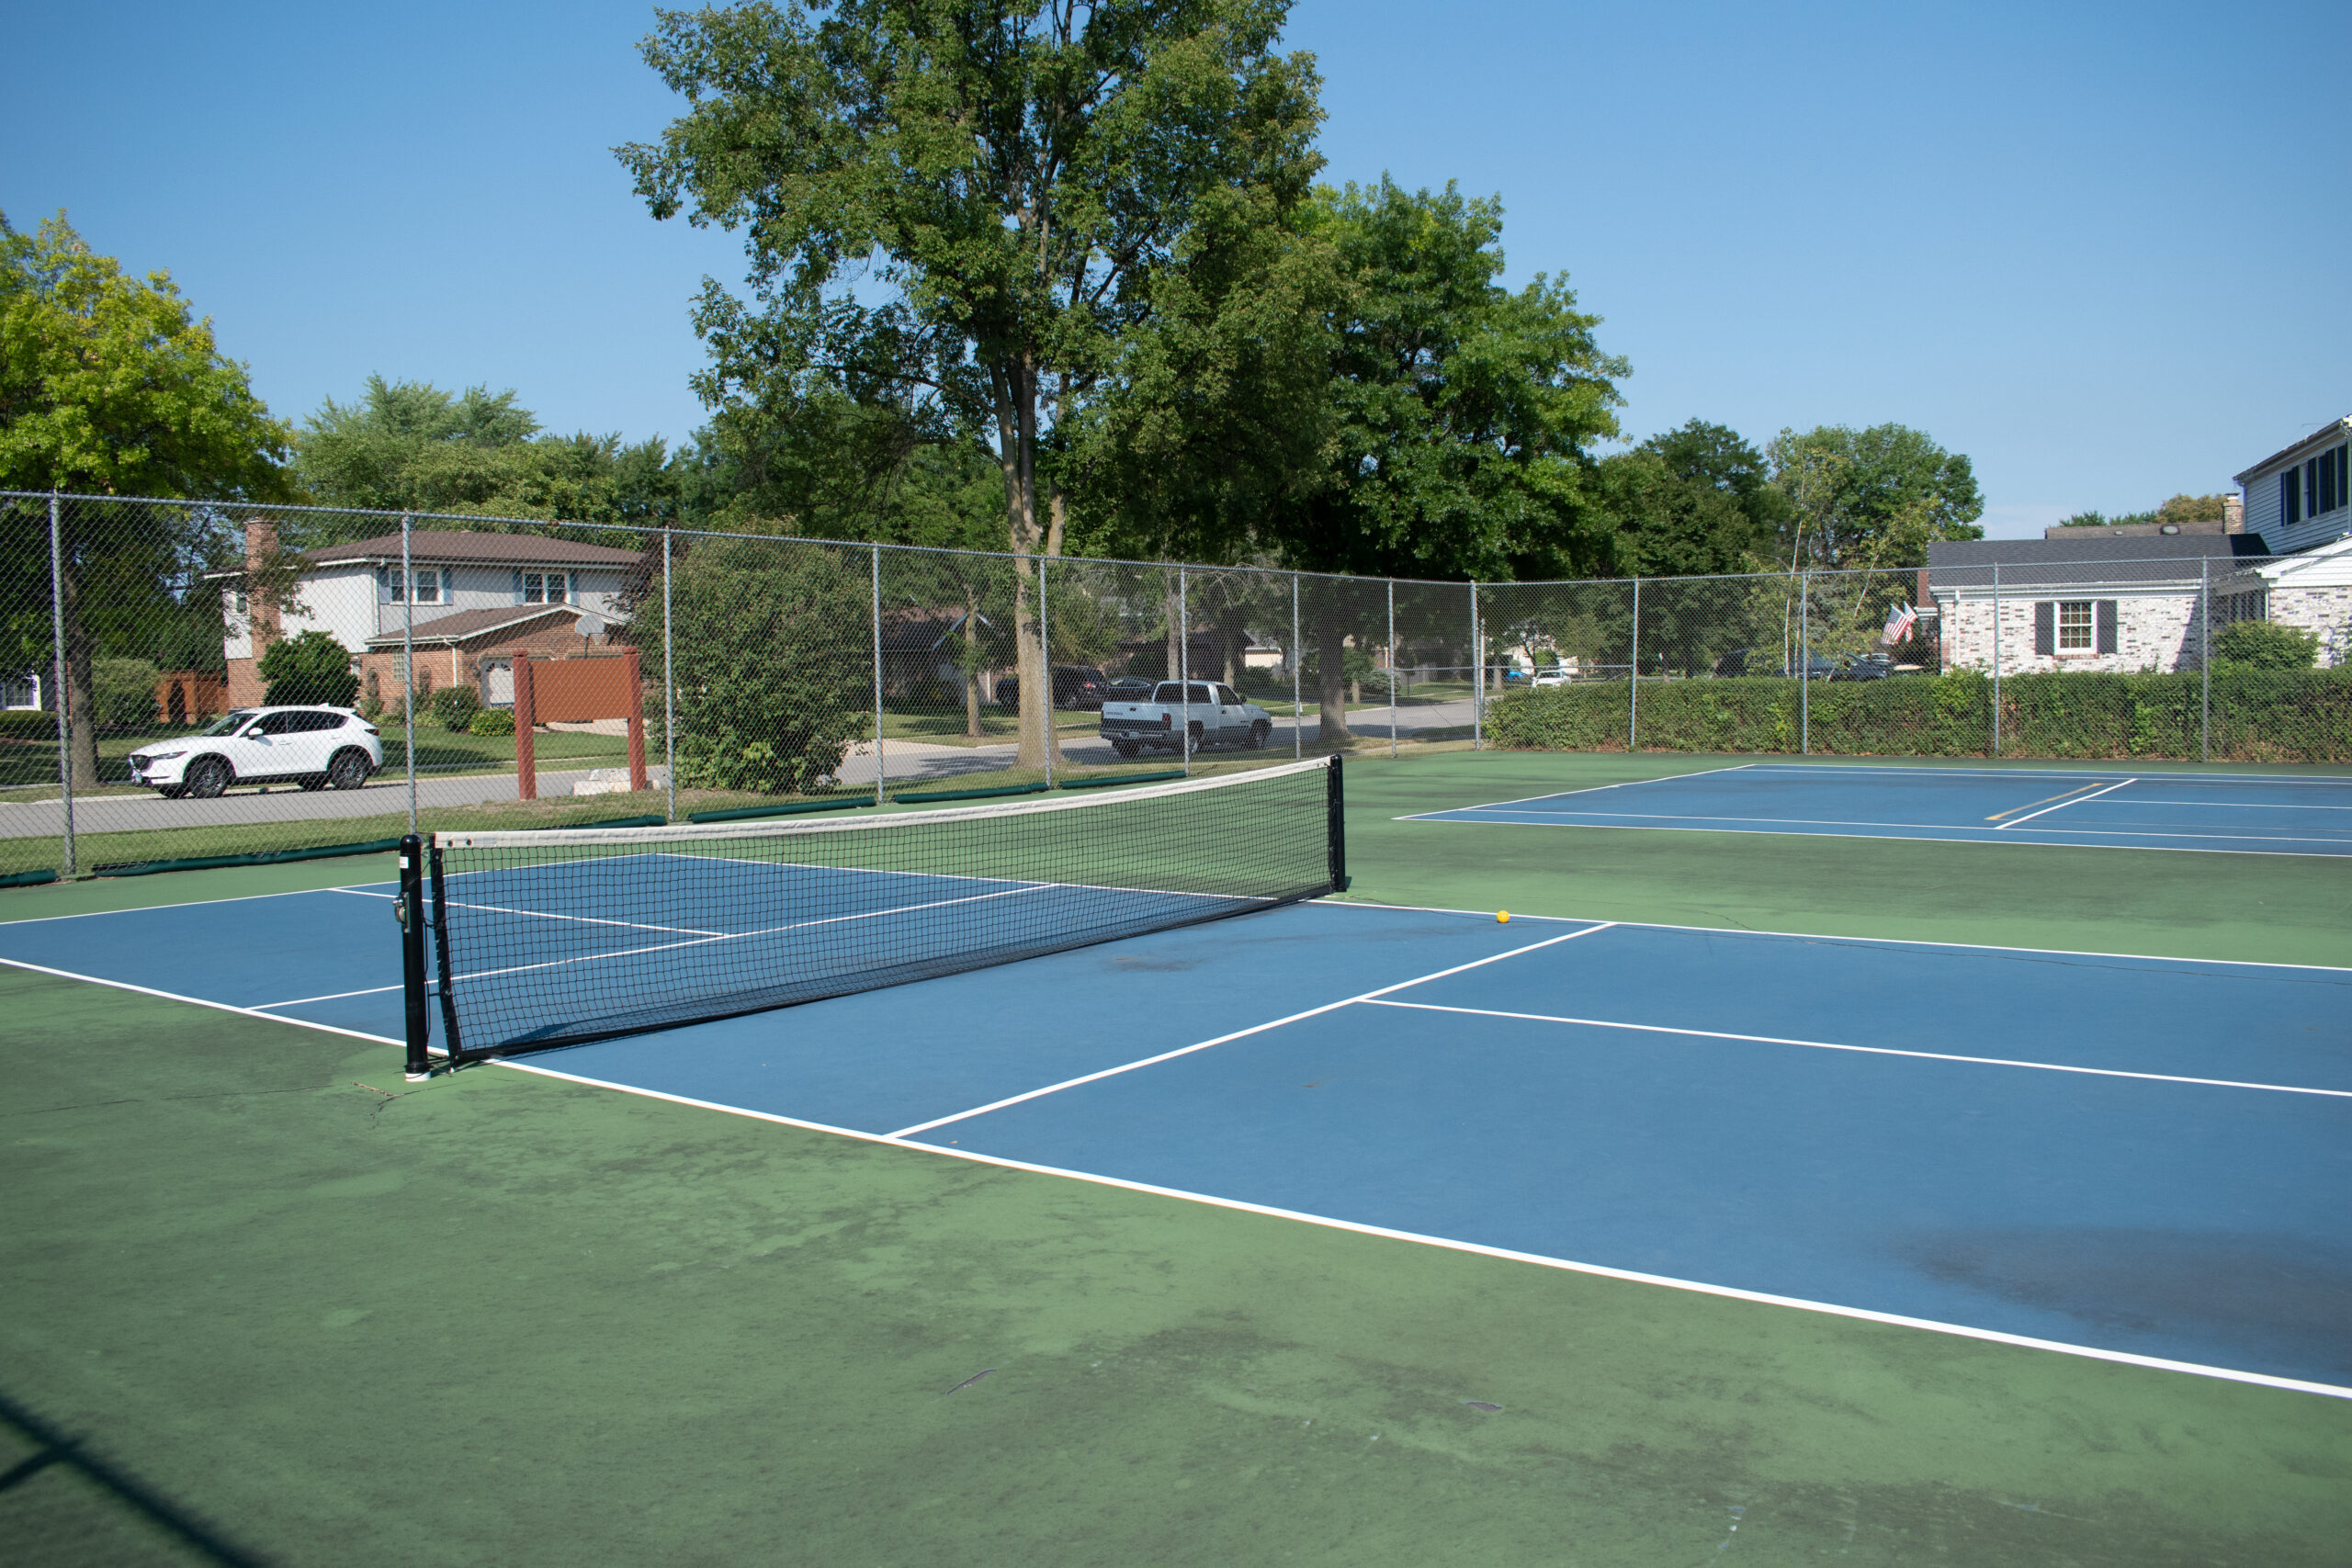 Sycamore Park Tennis Courts